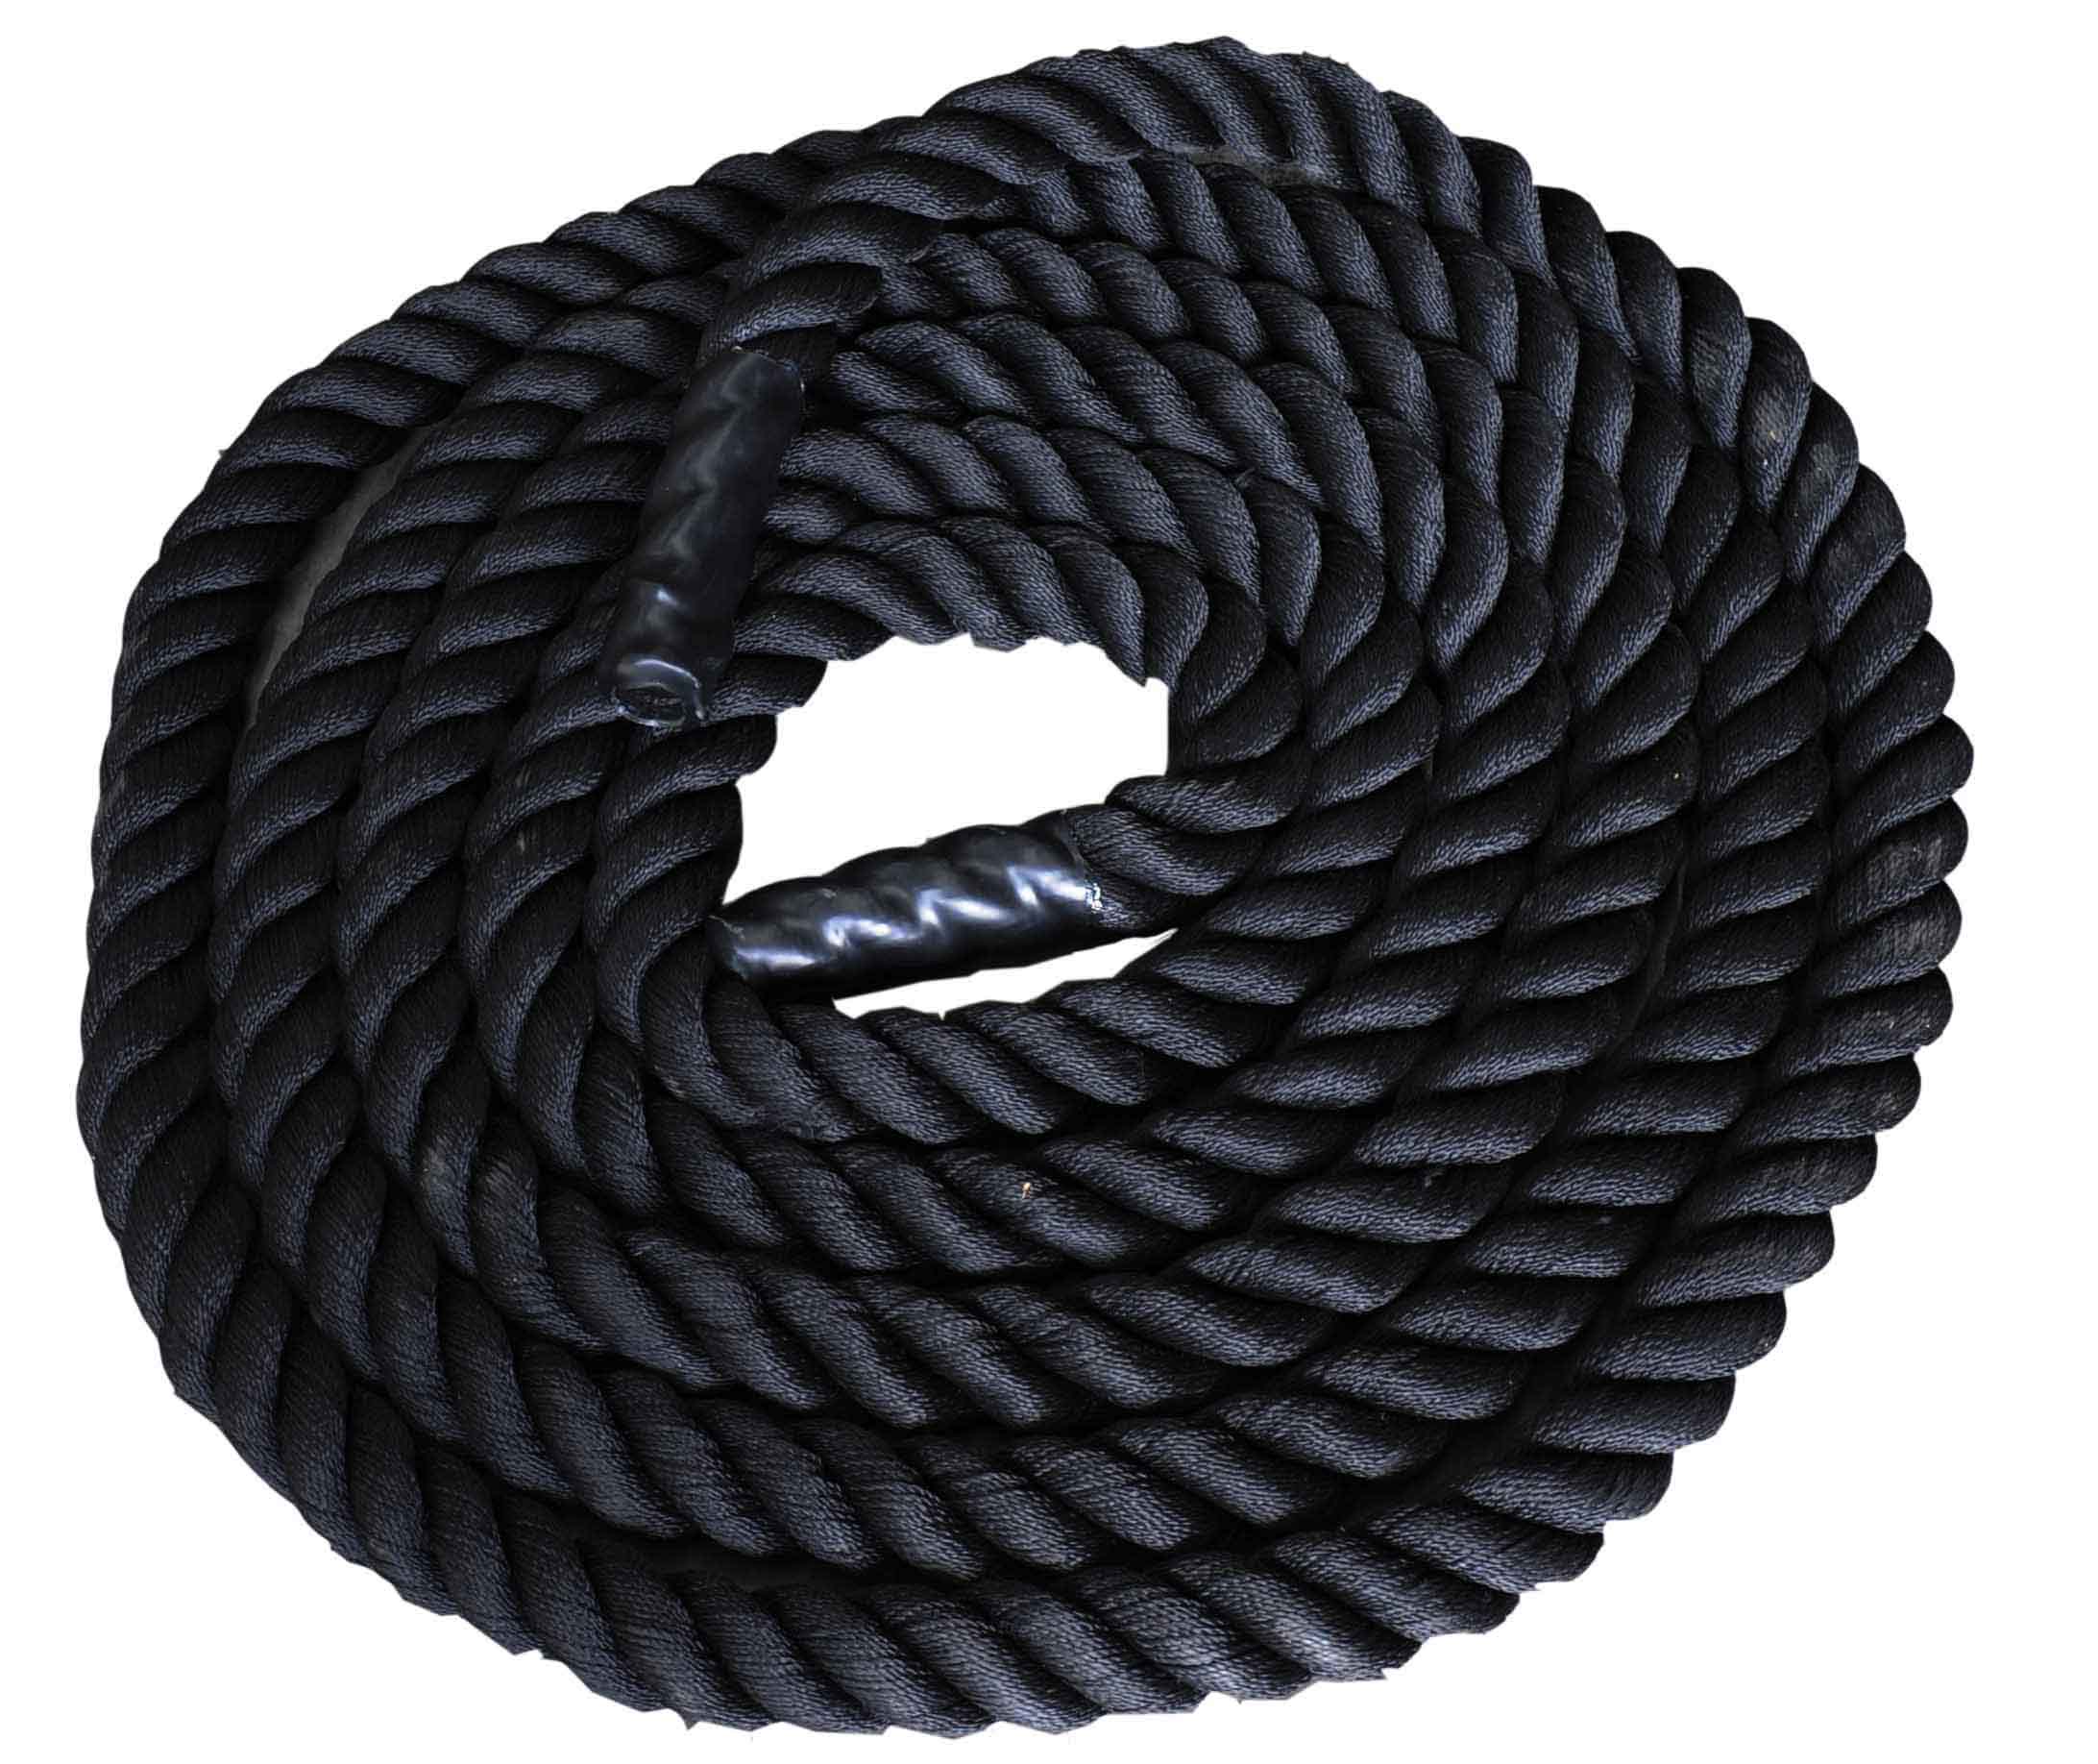 1.5" Thick Fitness Rope Battling Rope, Power Rope 20M